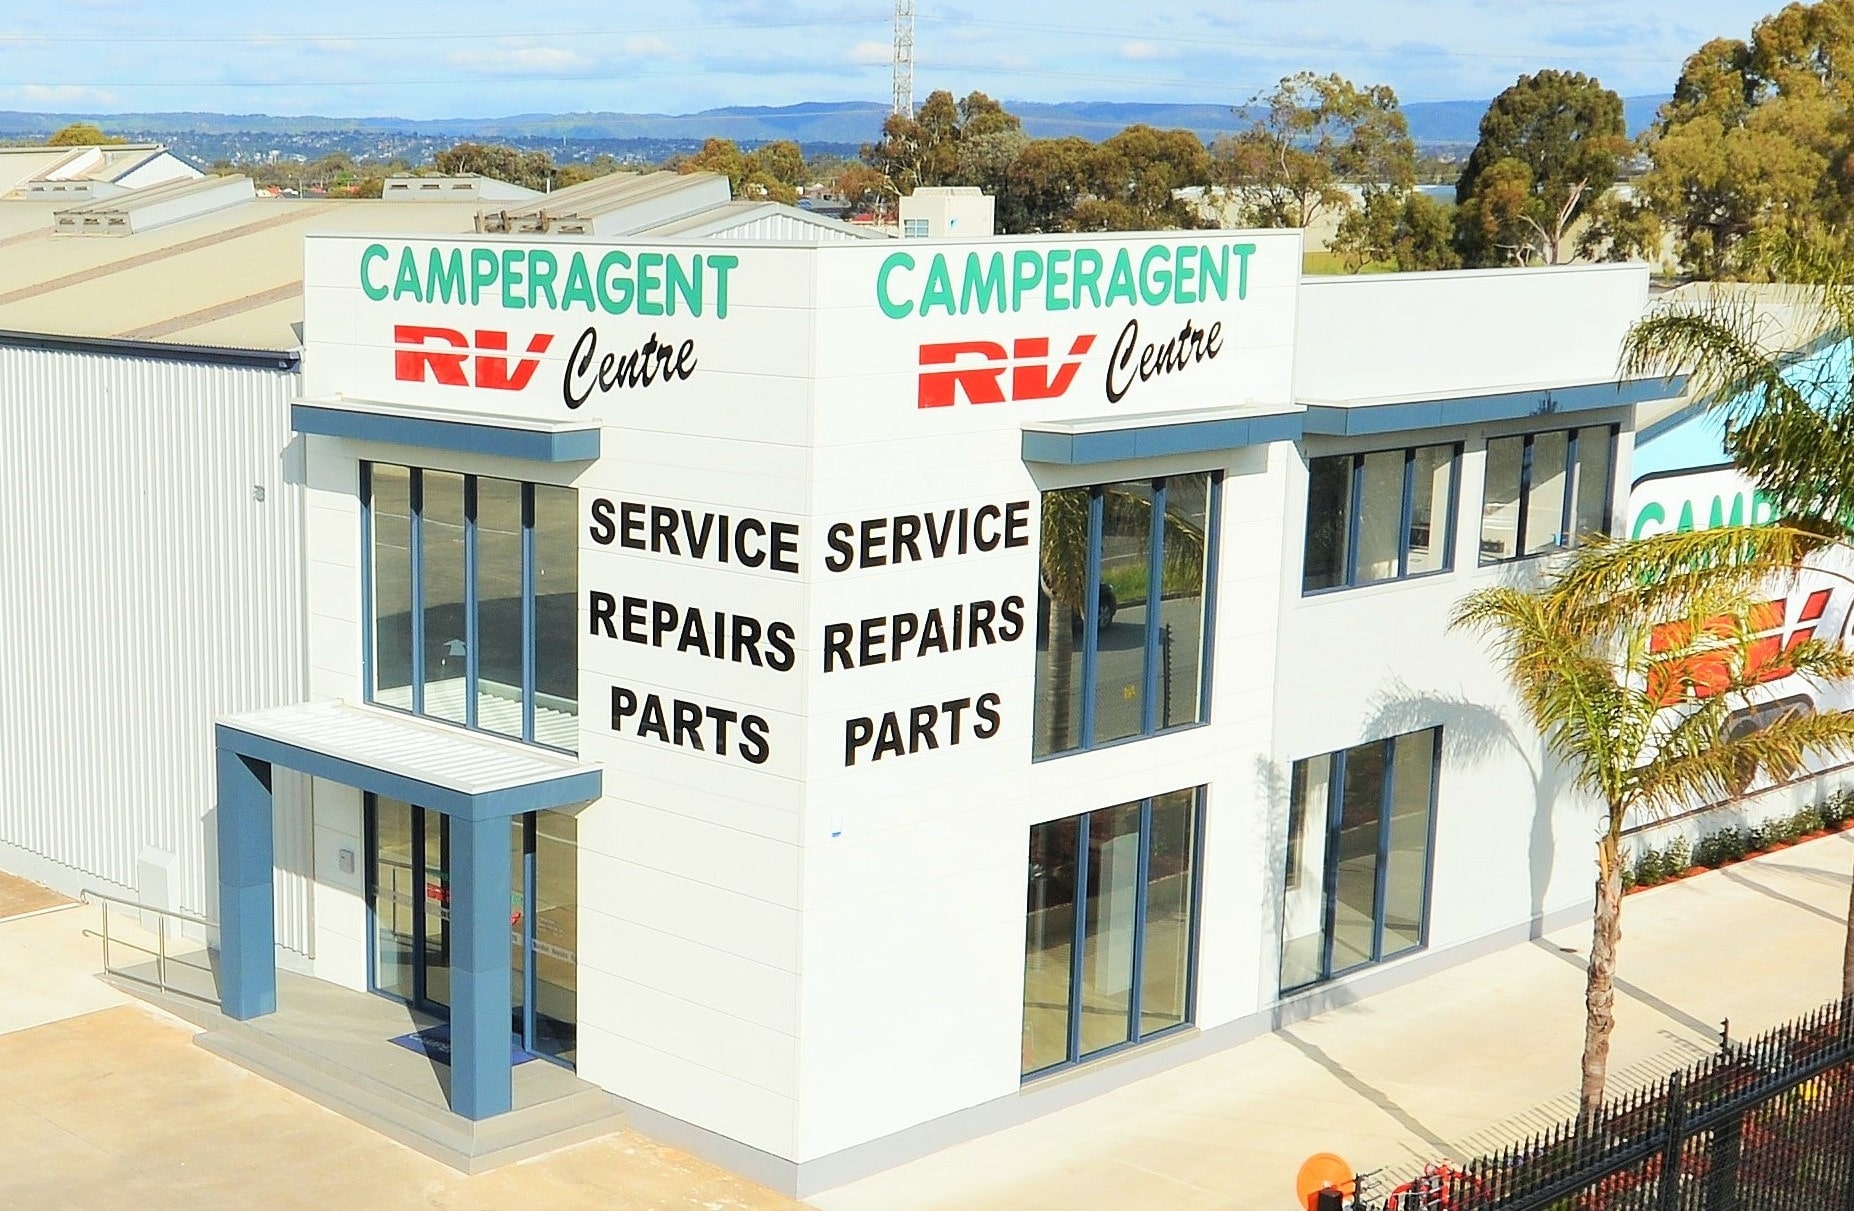 Camperagent Service Centre Adelaide. We Offer RV Service & Repairs including Warranty and Insurance. We Stock Caravan and RV Parts